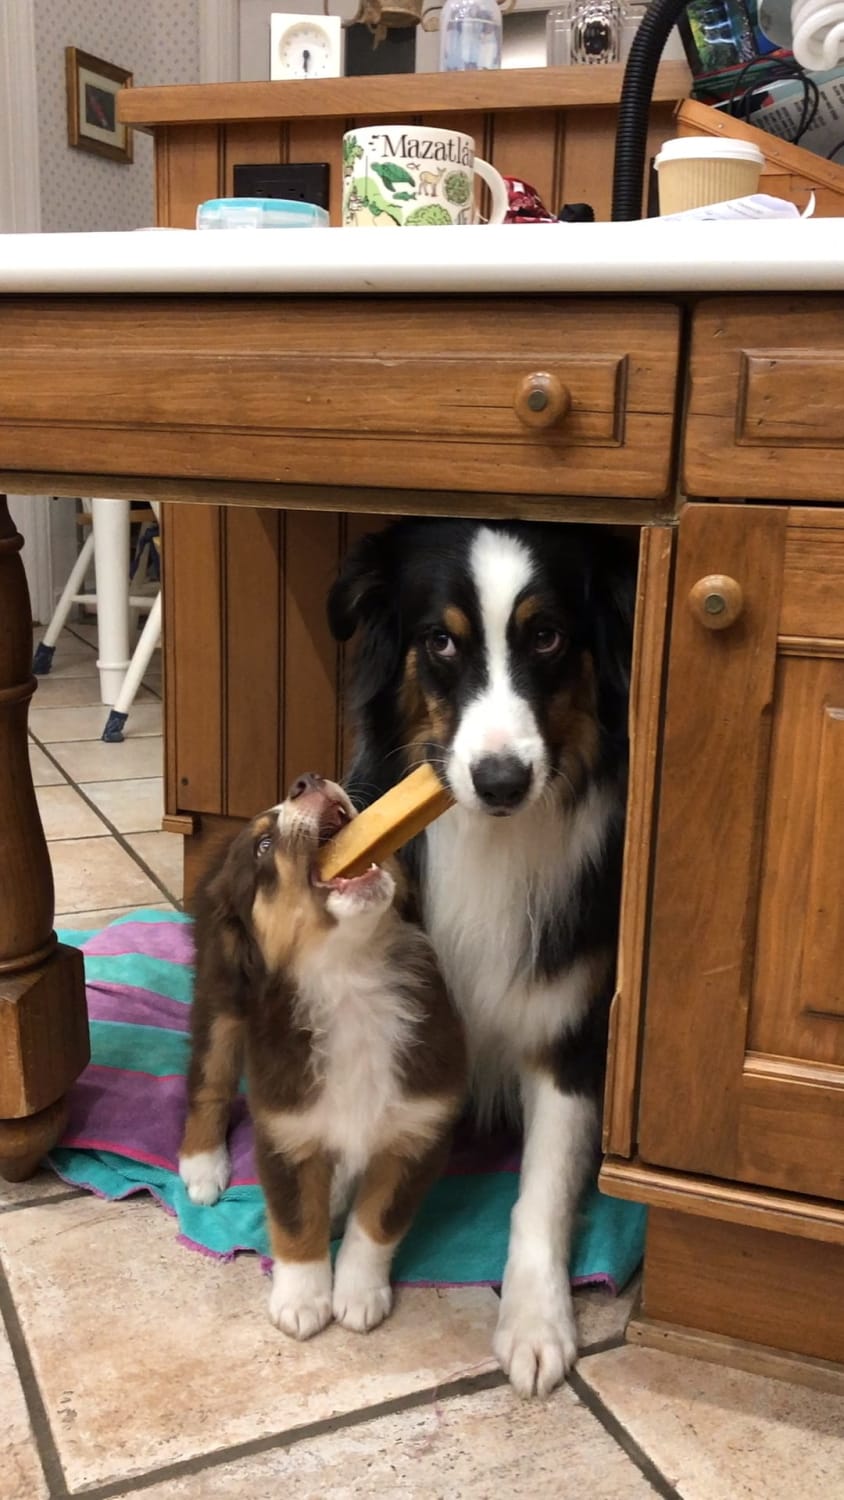 Our 3 year old Aussie is not amused with the new puppy